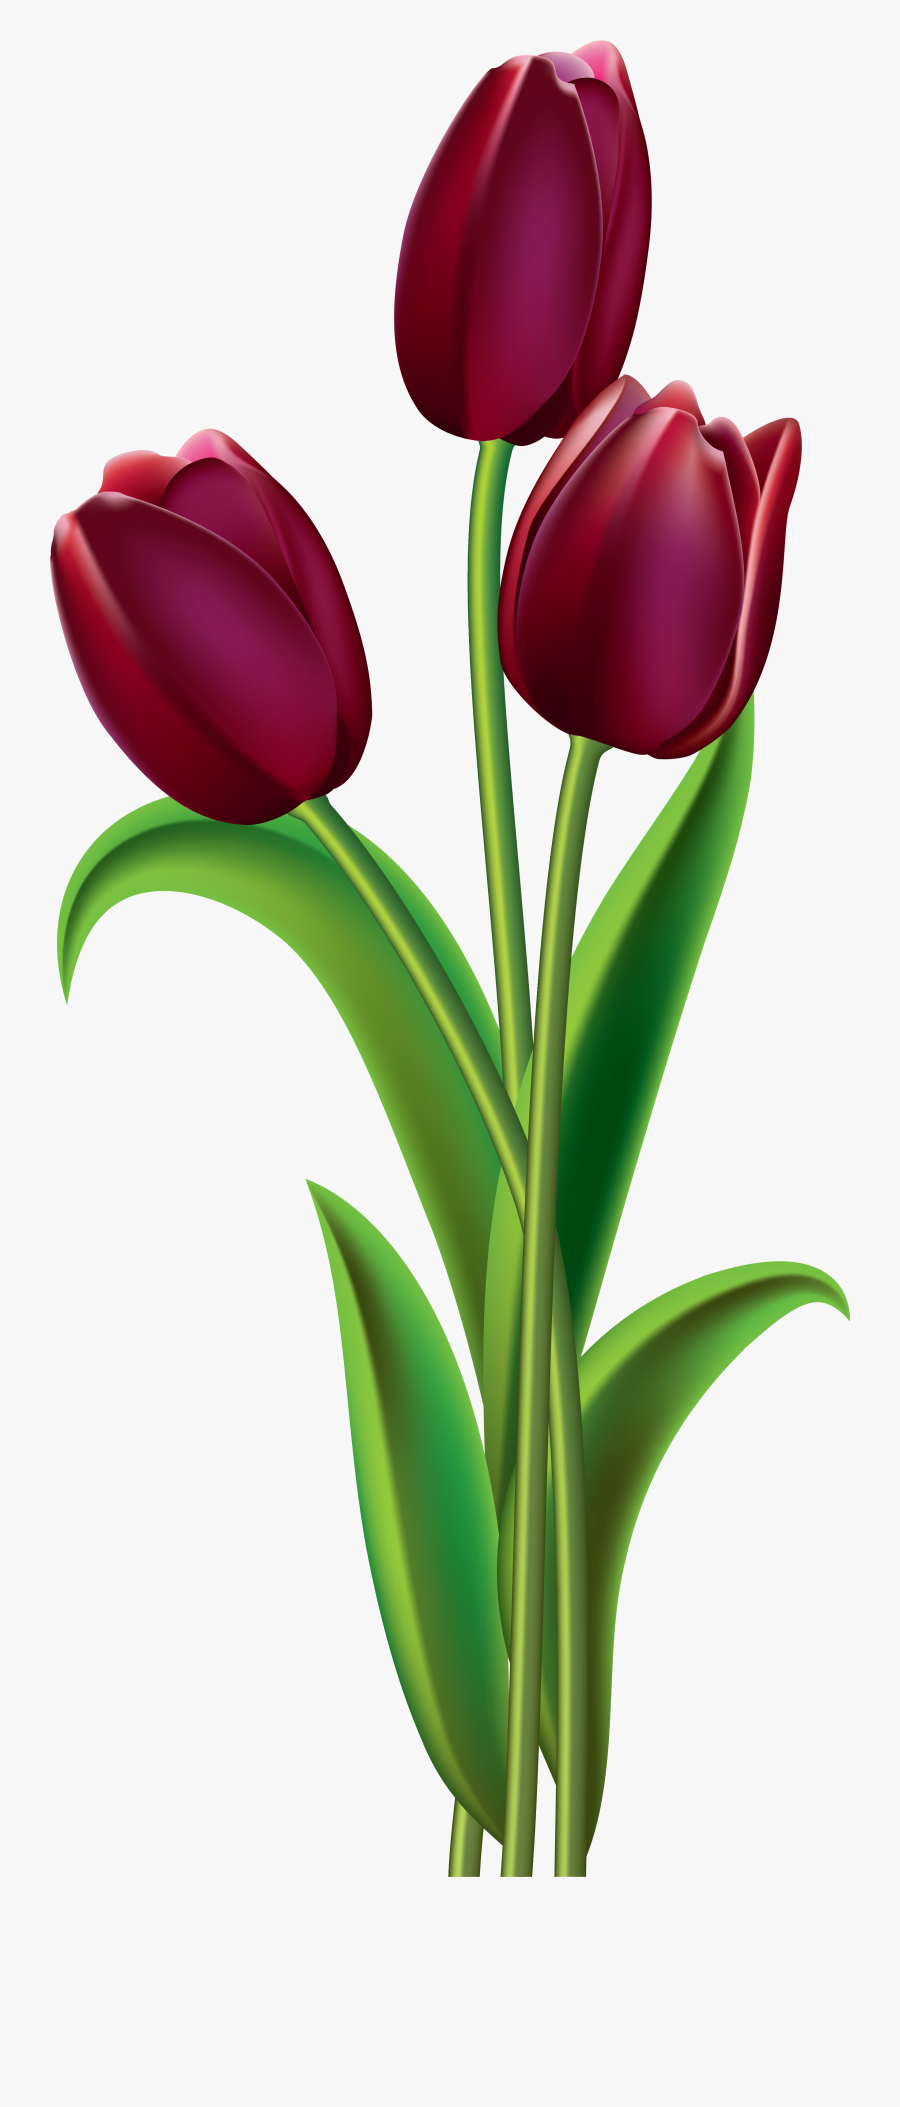 Red Dark Tulips Png Clipart Image - Transparent Tulip Png, Transparent Clipart